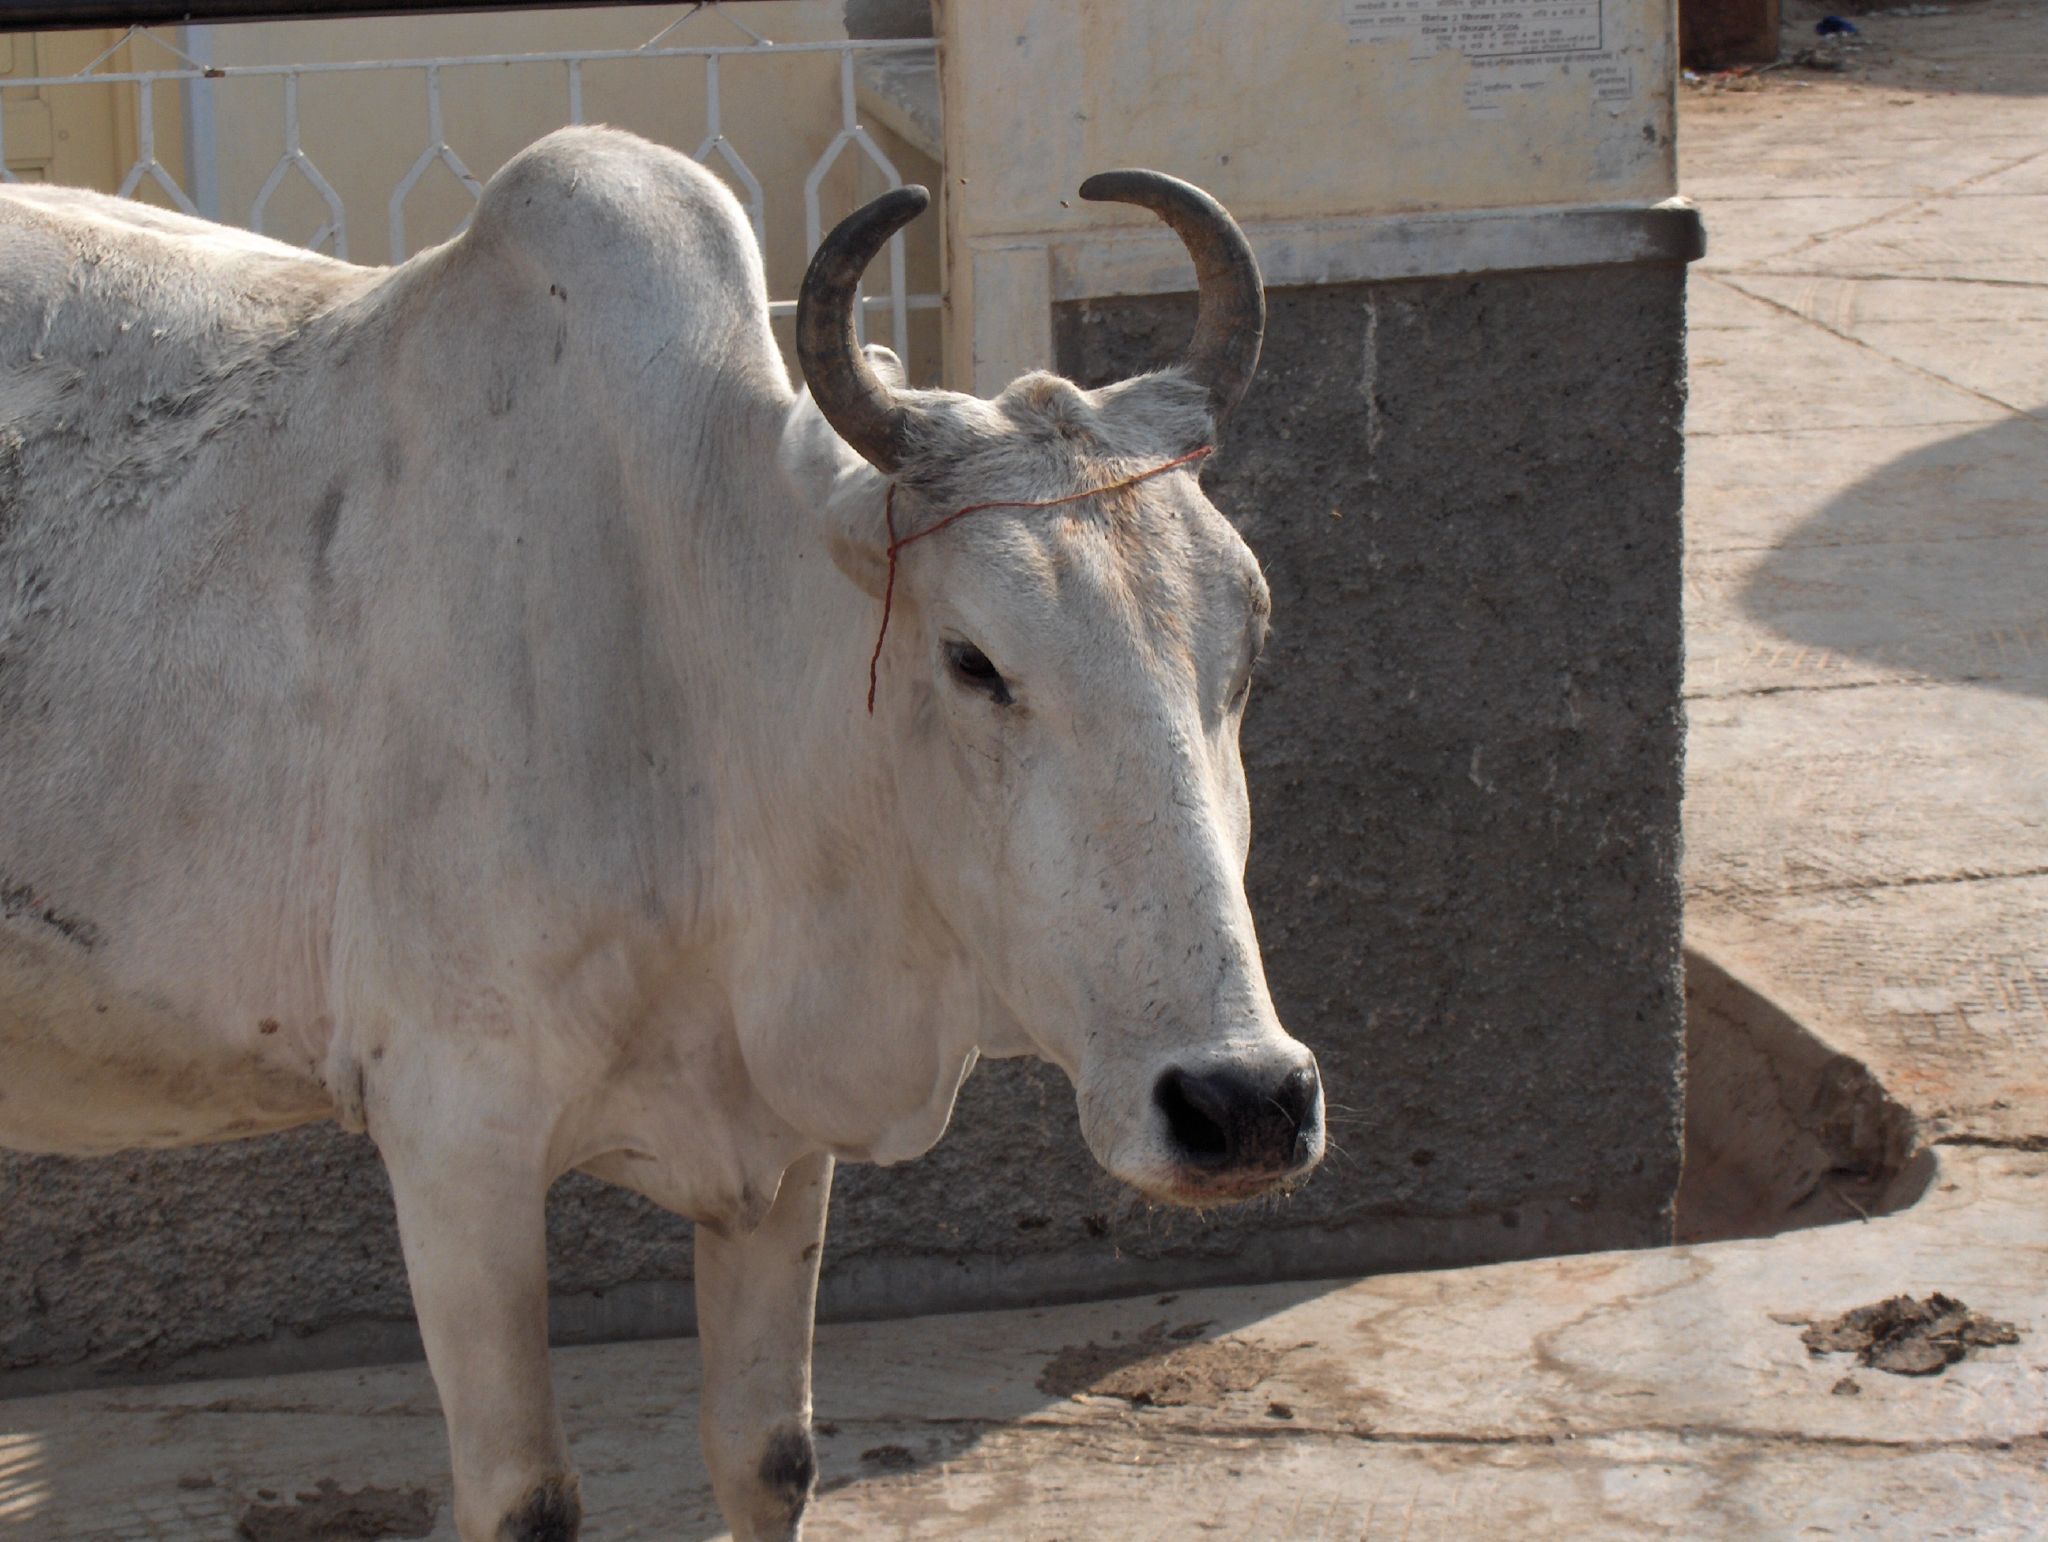 a large white cow with horns standing next to a brick building